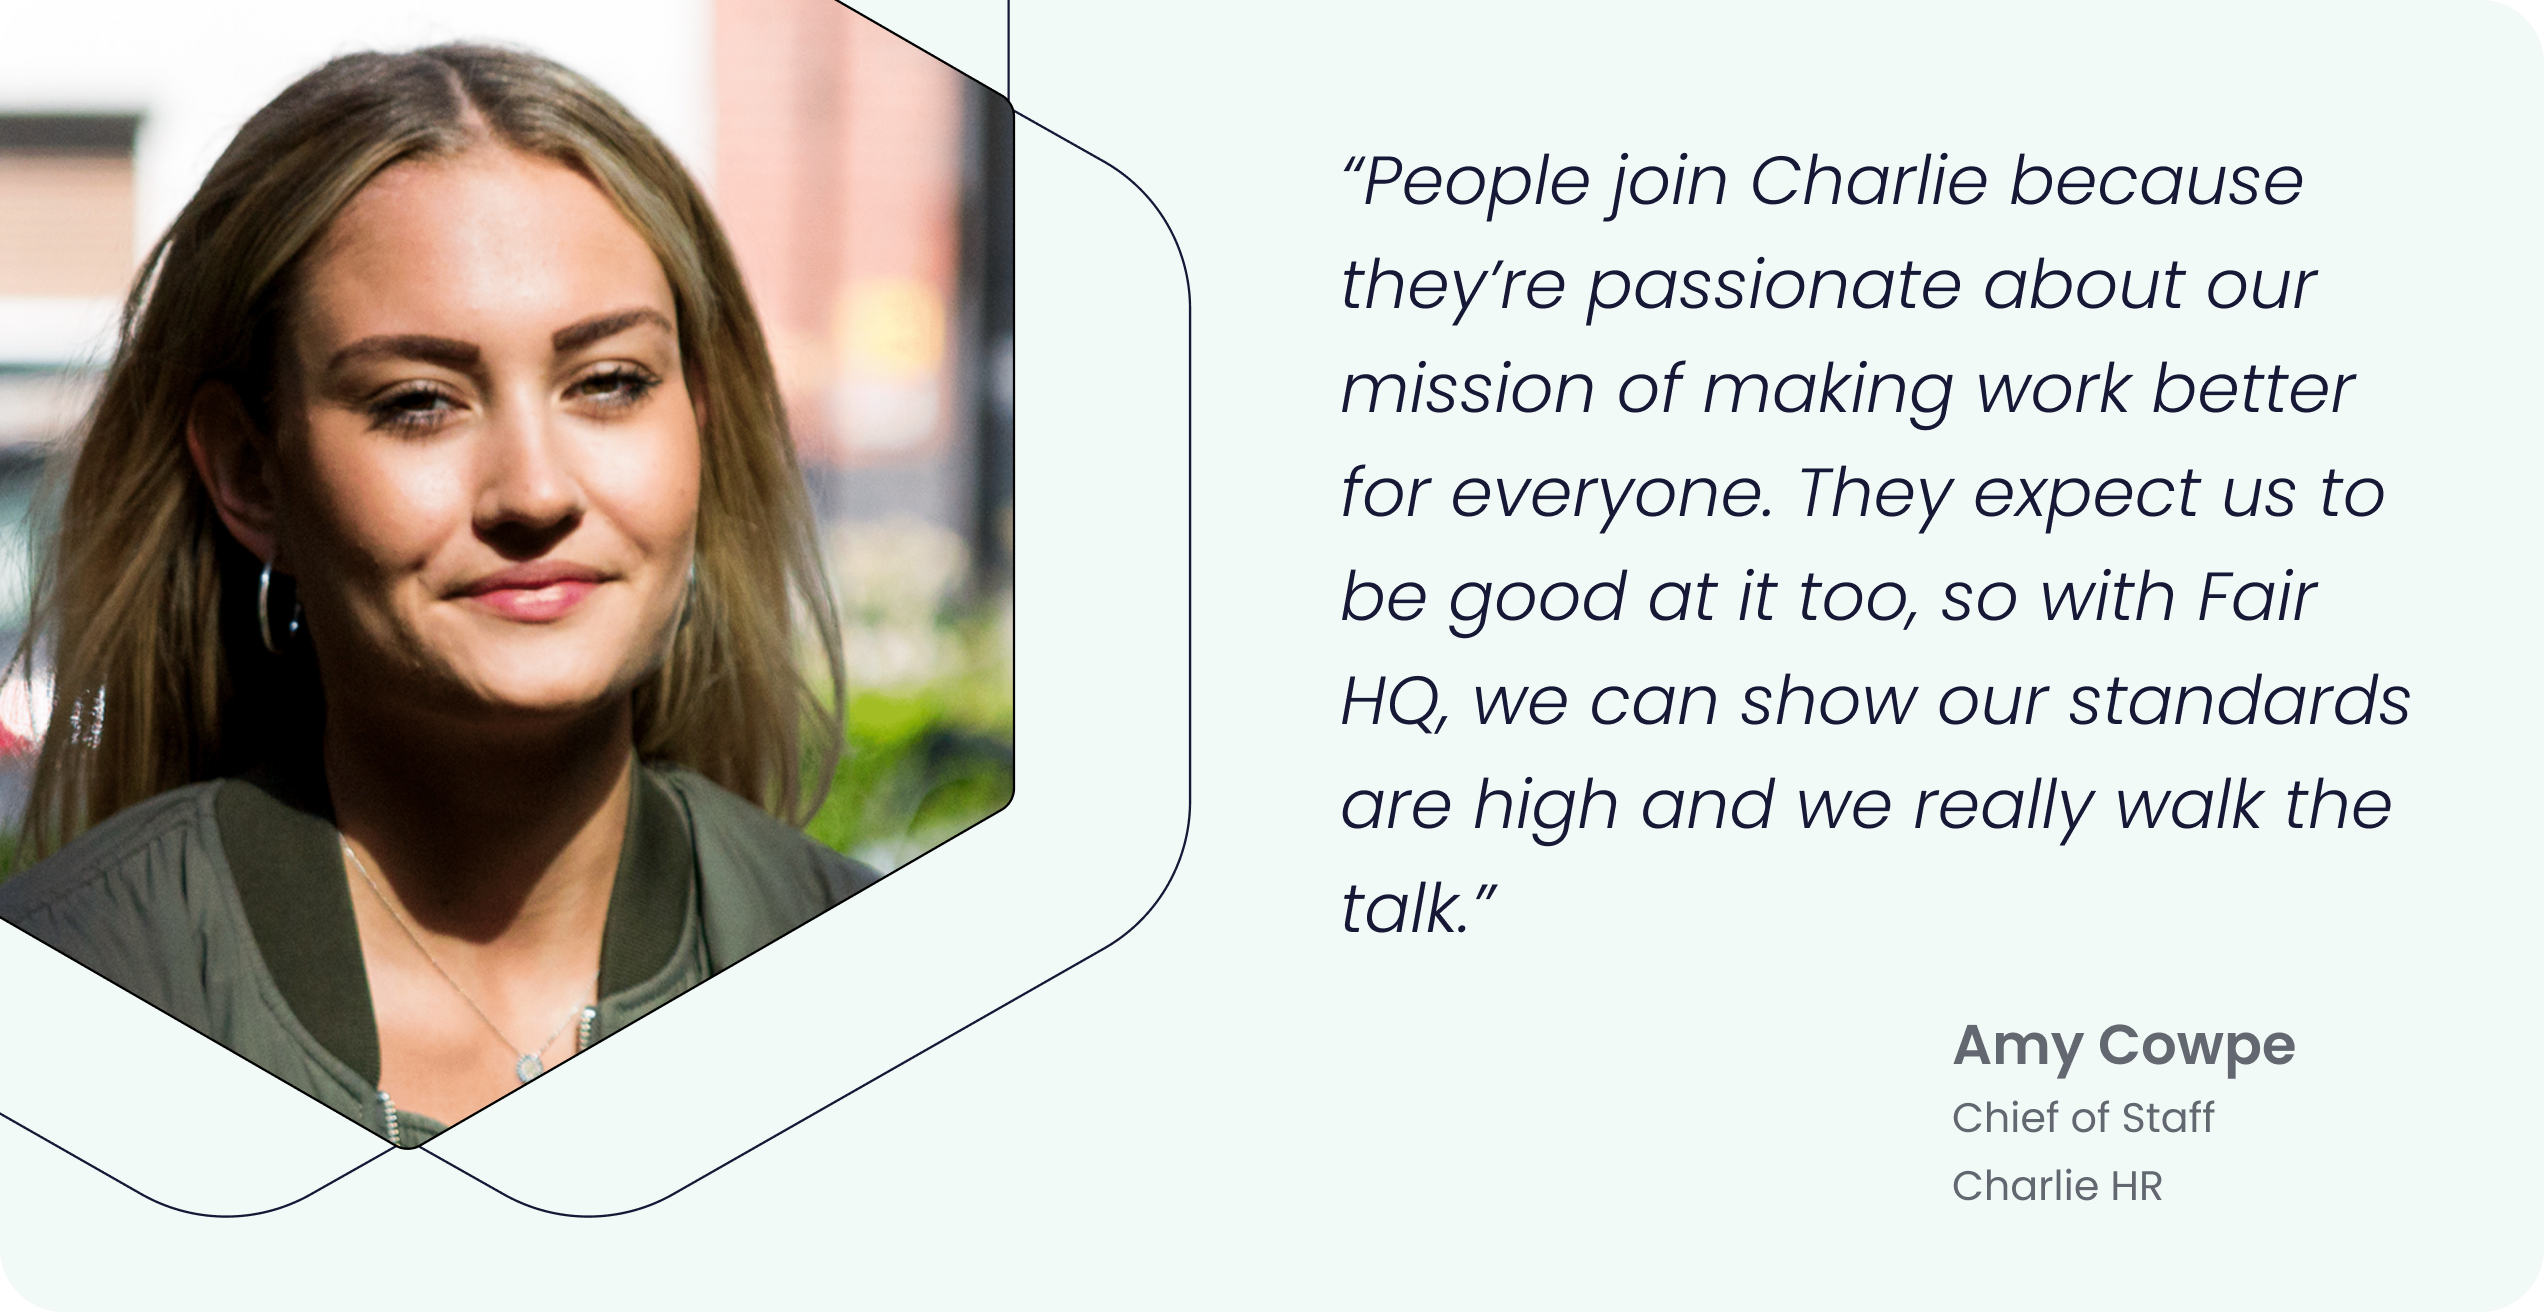 “People join Charlie because they’re passionate about our mission of making work better for everyone. They expect us to be good at it too, so with Fair HQ, we can show our standards are high and we really walk the talk.” - Amy Cowpe